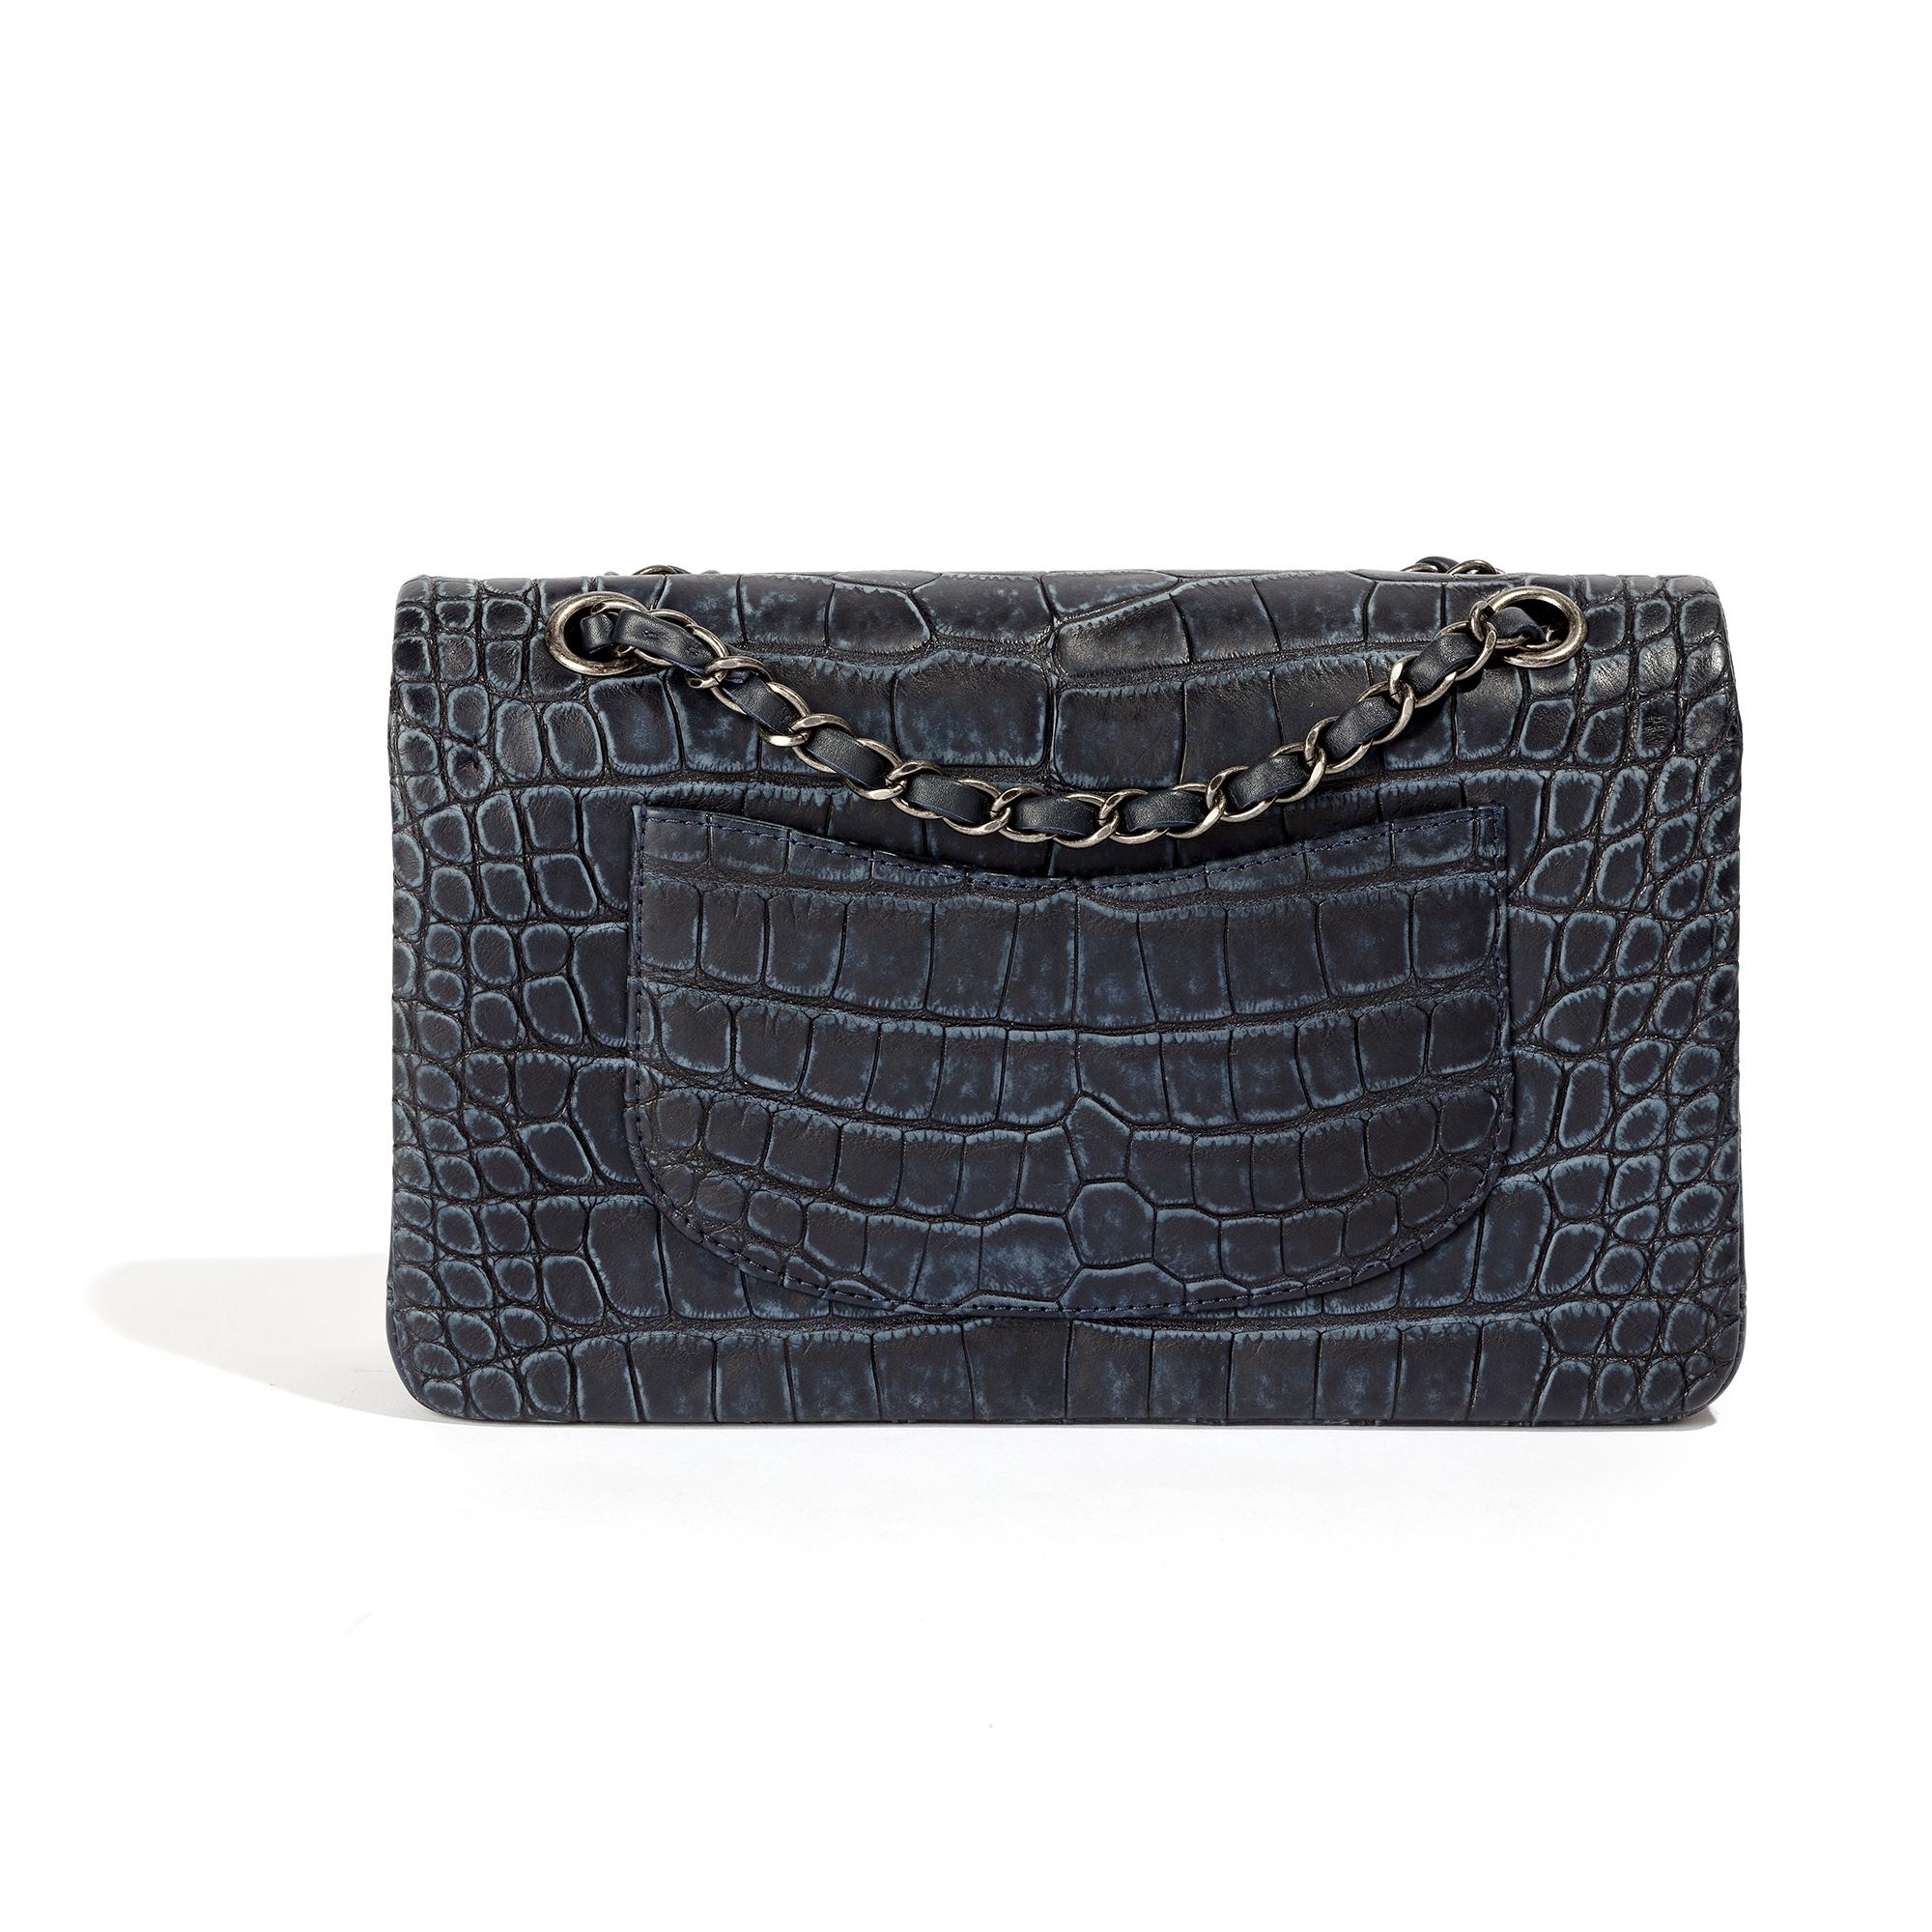 This unique and highly desirable Chanel item is skillfully crafted from navy leather. The double-flap bag has a spacious compartment and two interior pockets, offering plenty of room. The bag features a leather chain strap that can be worn as a